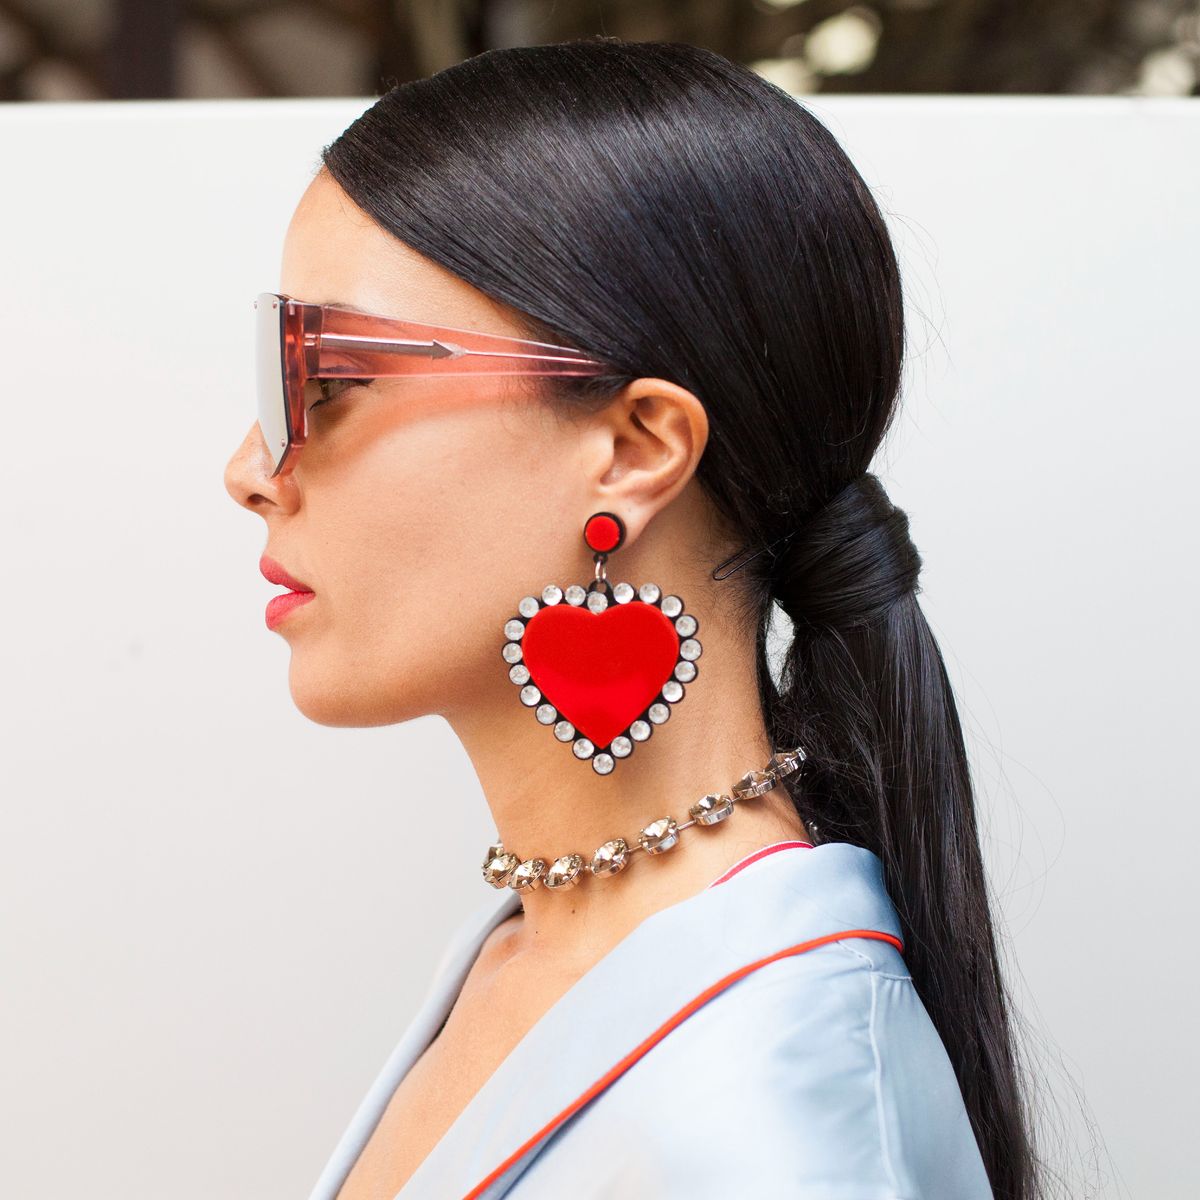 20 Slicked Back Ponytails That Are So Easy to Do   Marie Claire